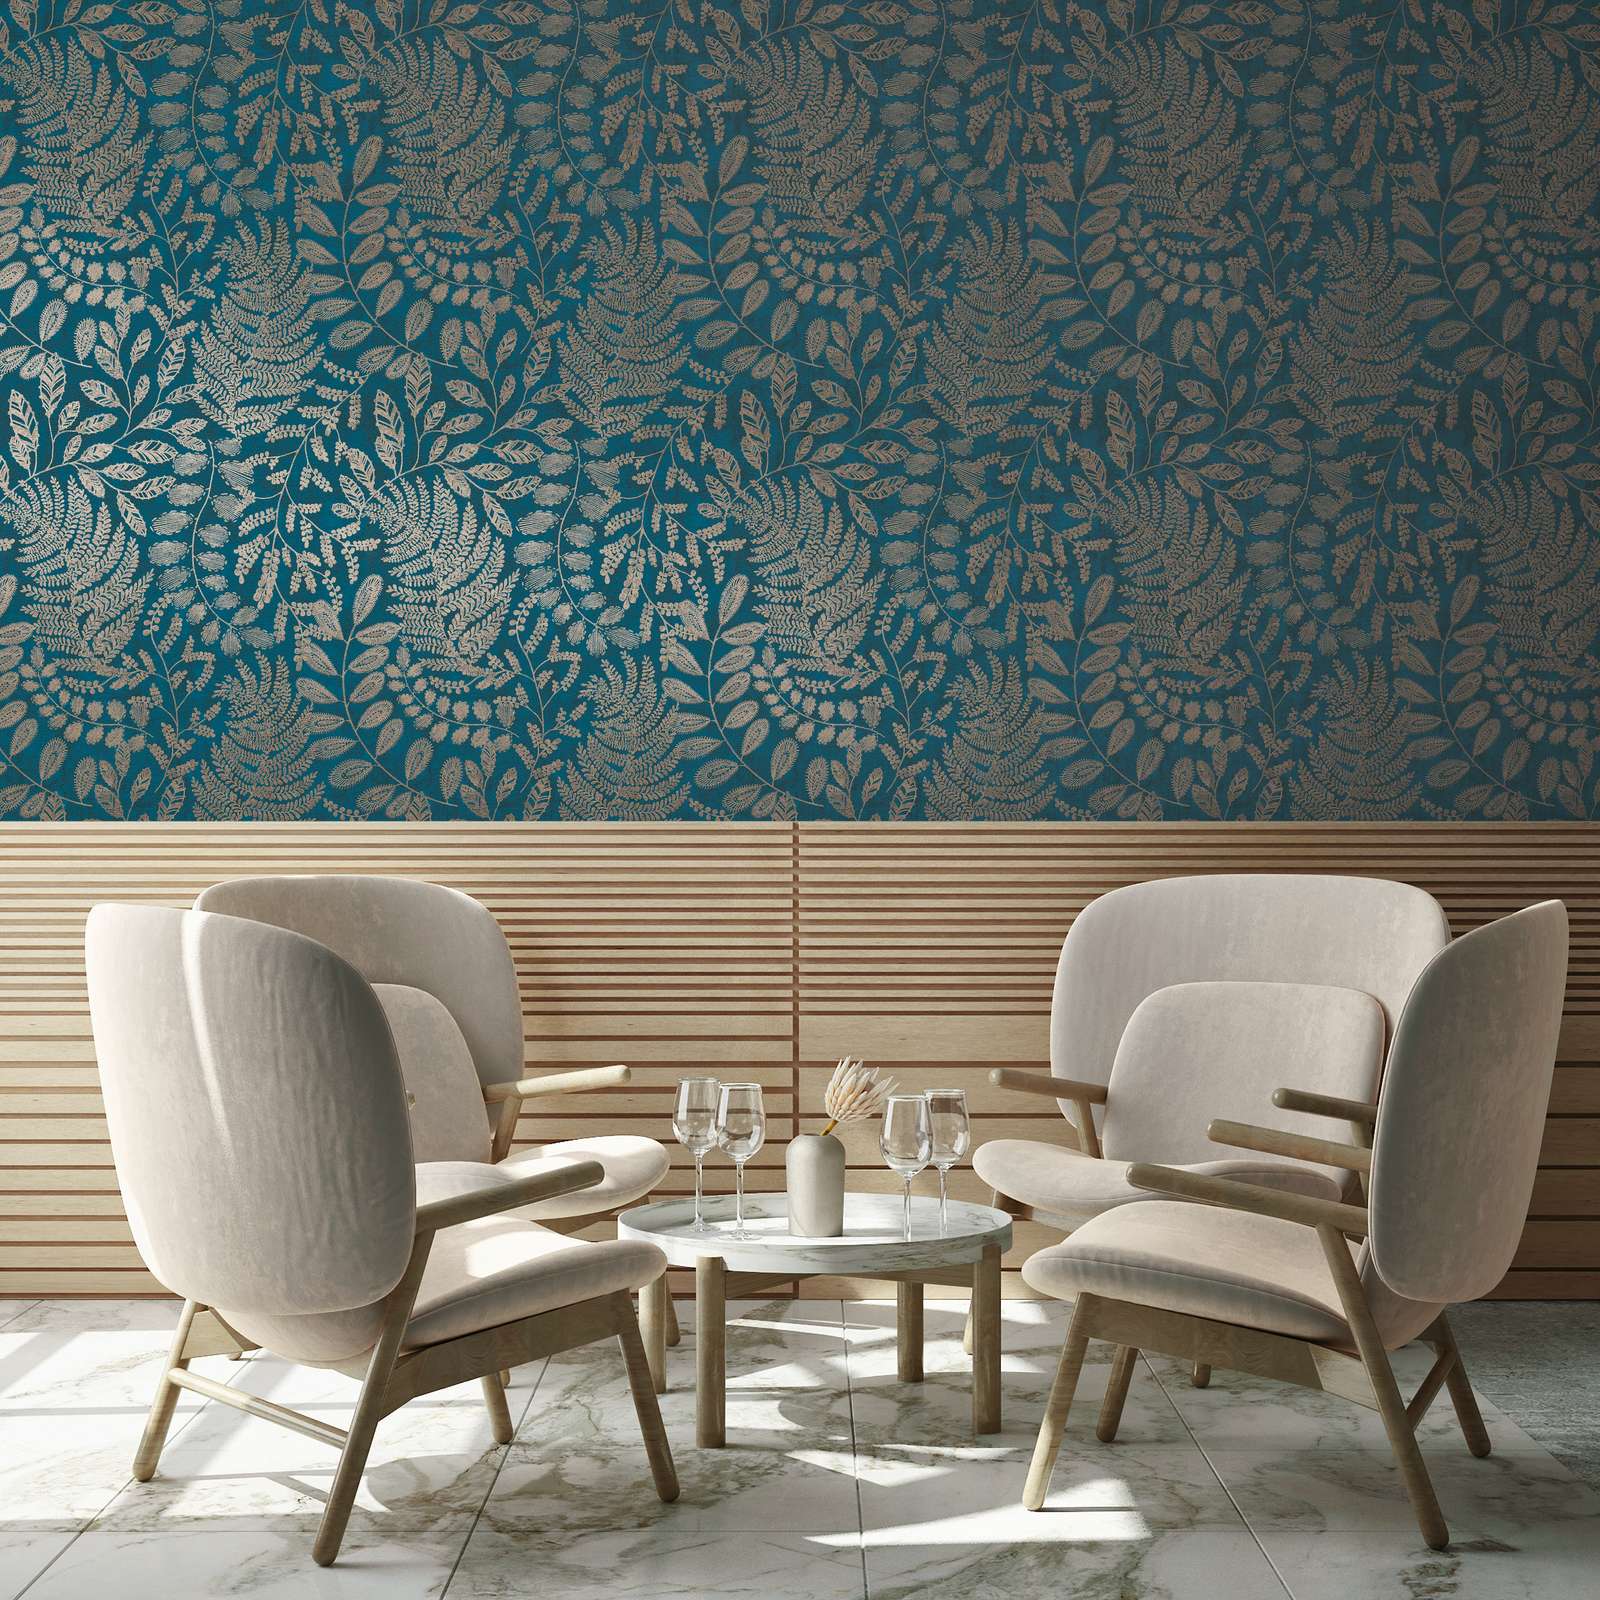             Blue wallpaper with gold design in boho style
        